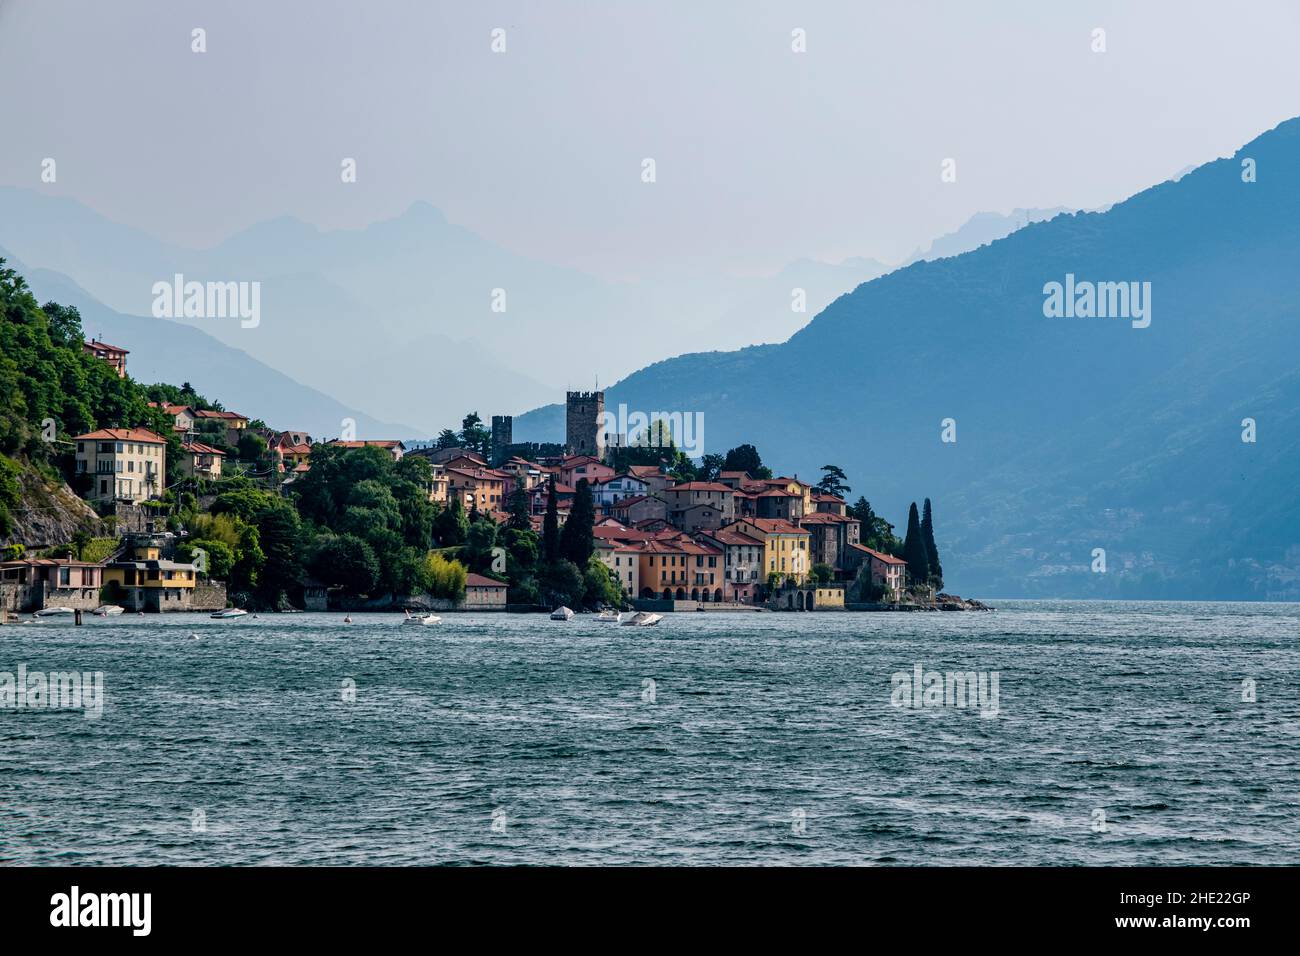 View of the lakeside of town, including the Castello di Rezzonico, across Lake Como from a ferryboat. Stock Photo